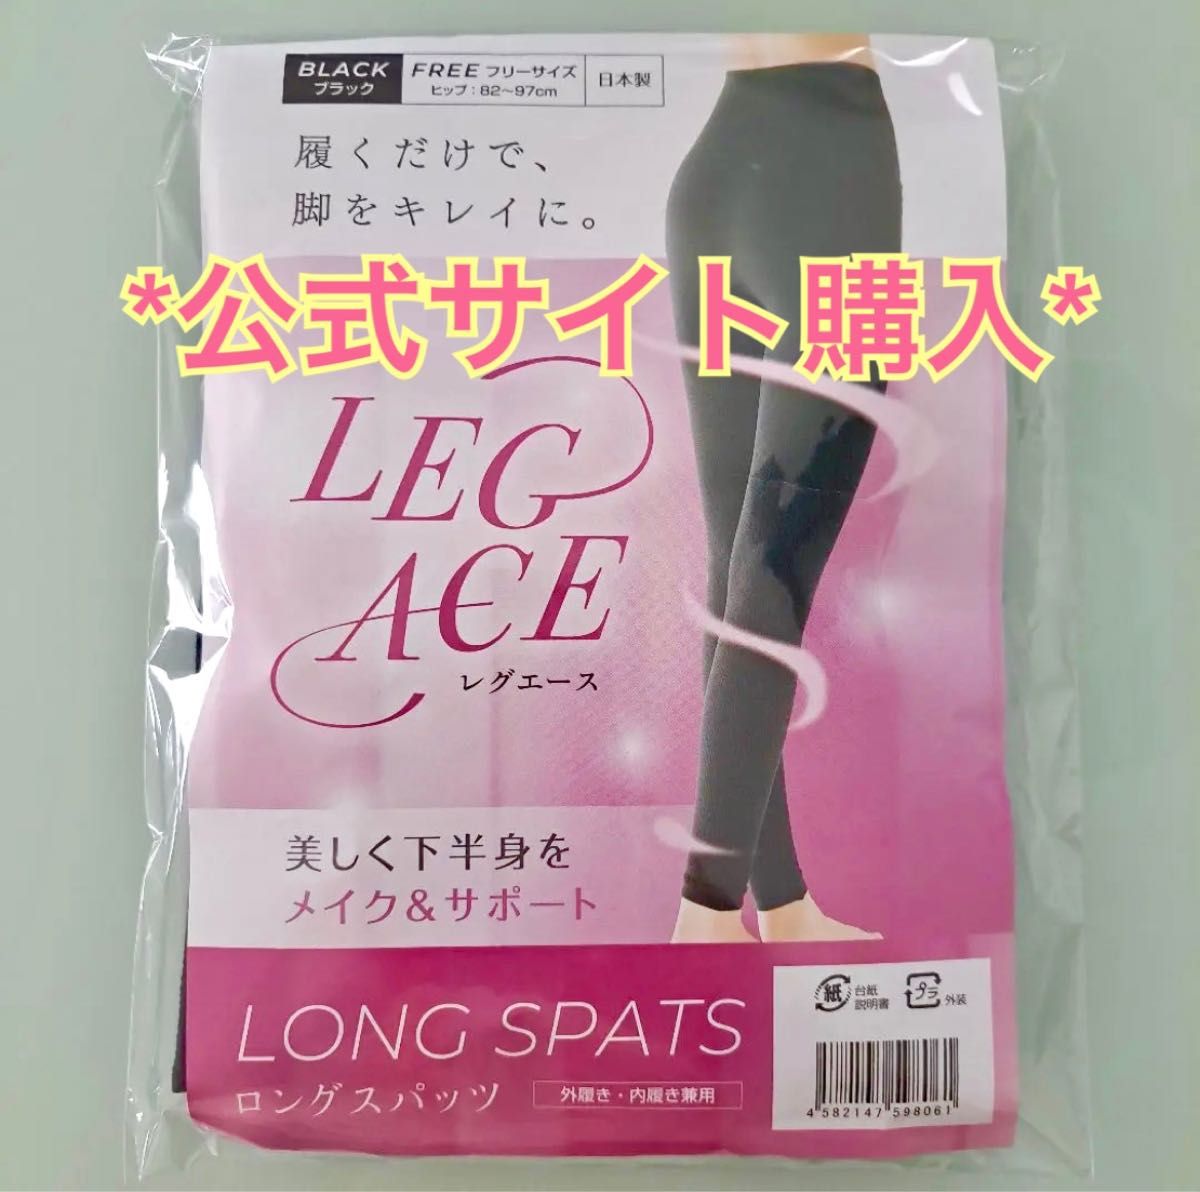 LEGACE レグエース ダイエットロングスパッツ｜PayPayフリマ